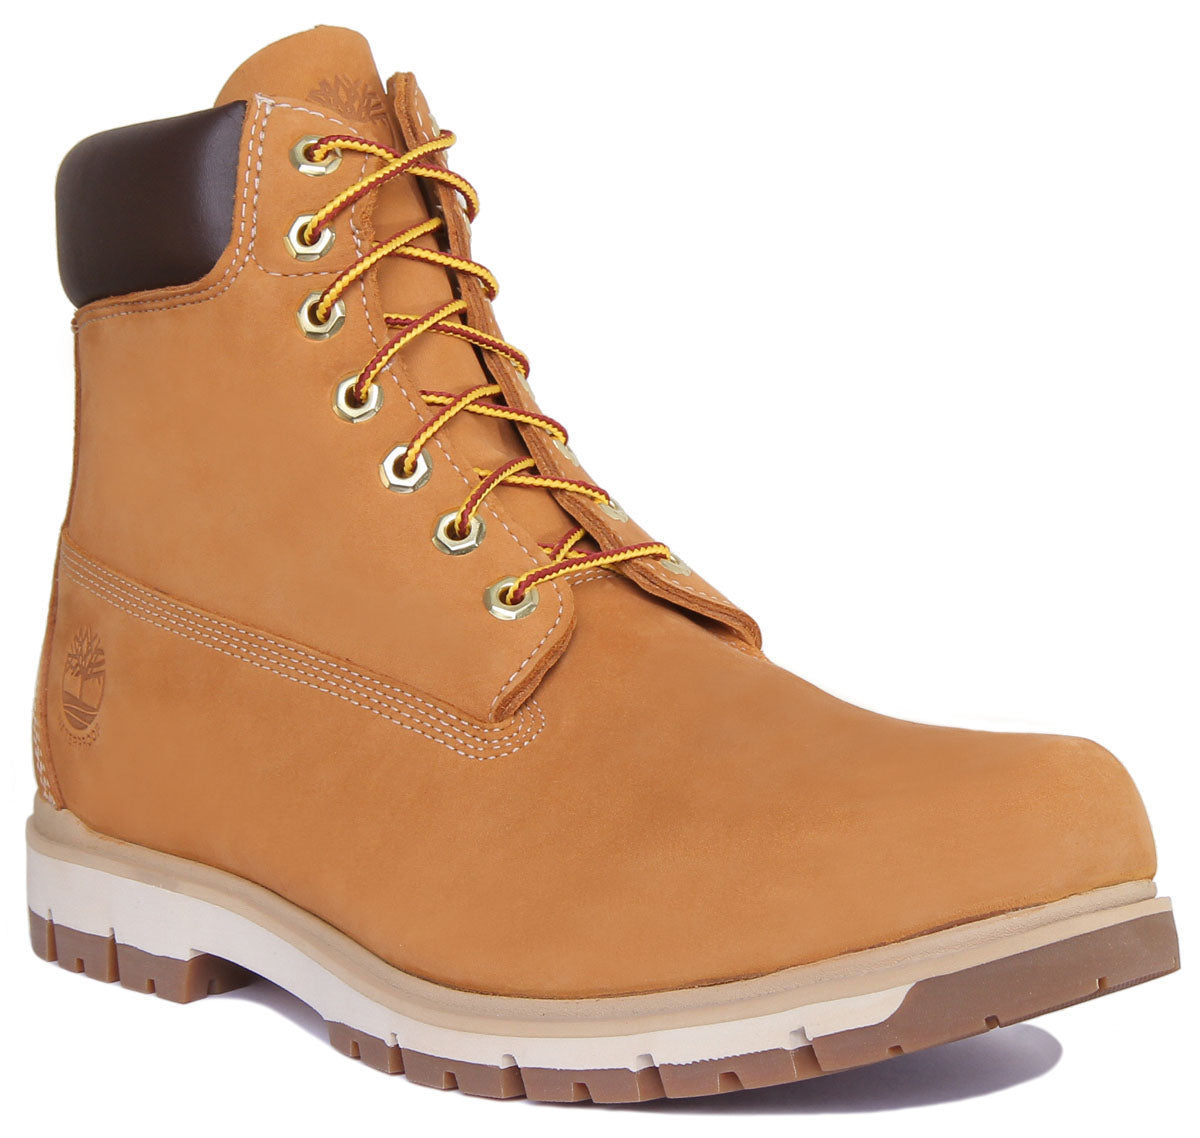 Timberland 6 inchLace up In Wheat For Men Radford Waterproof Boot – 4feetshoes